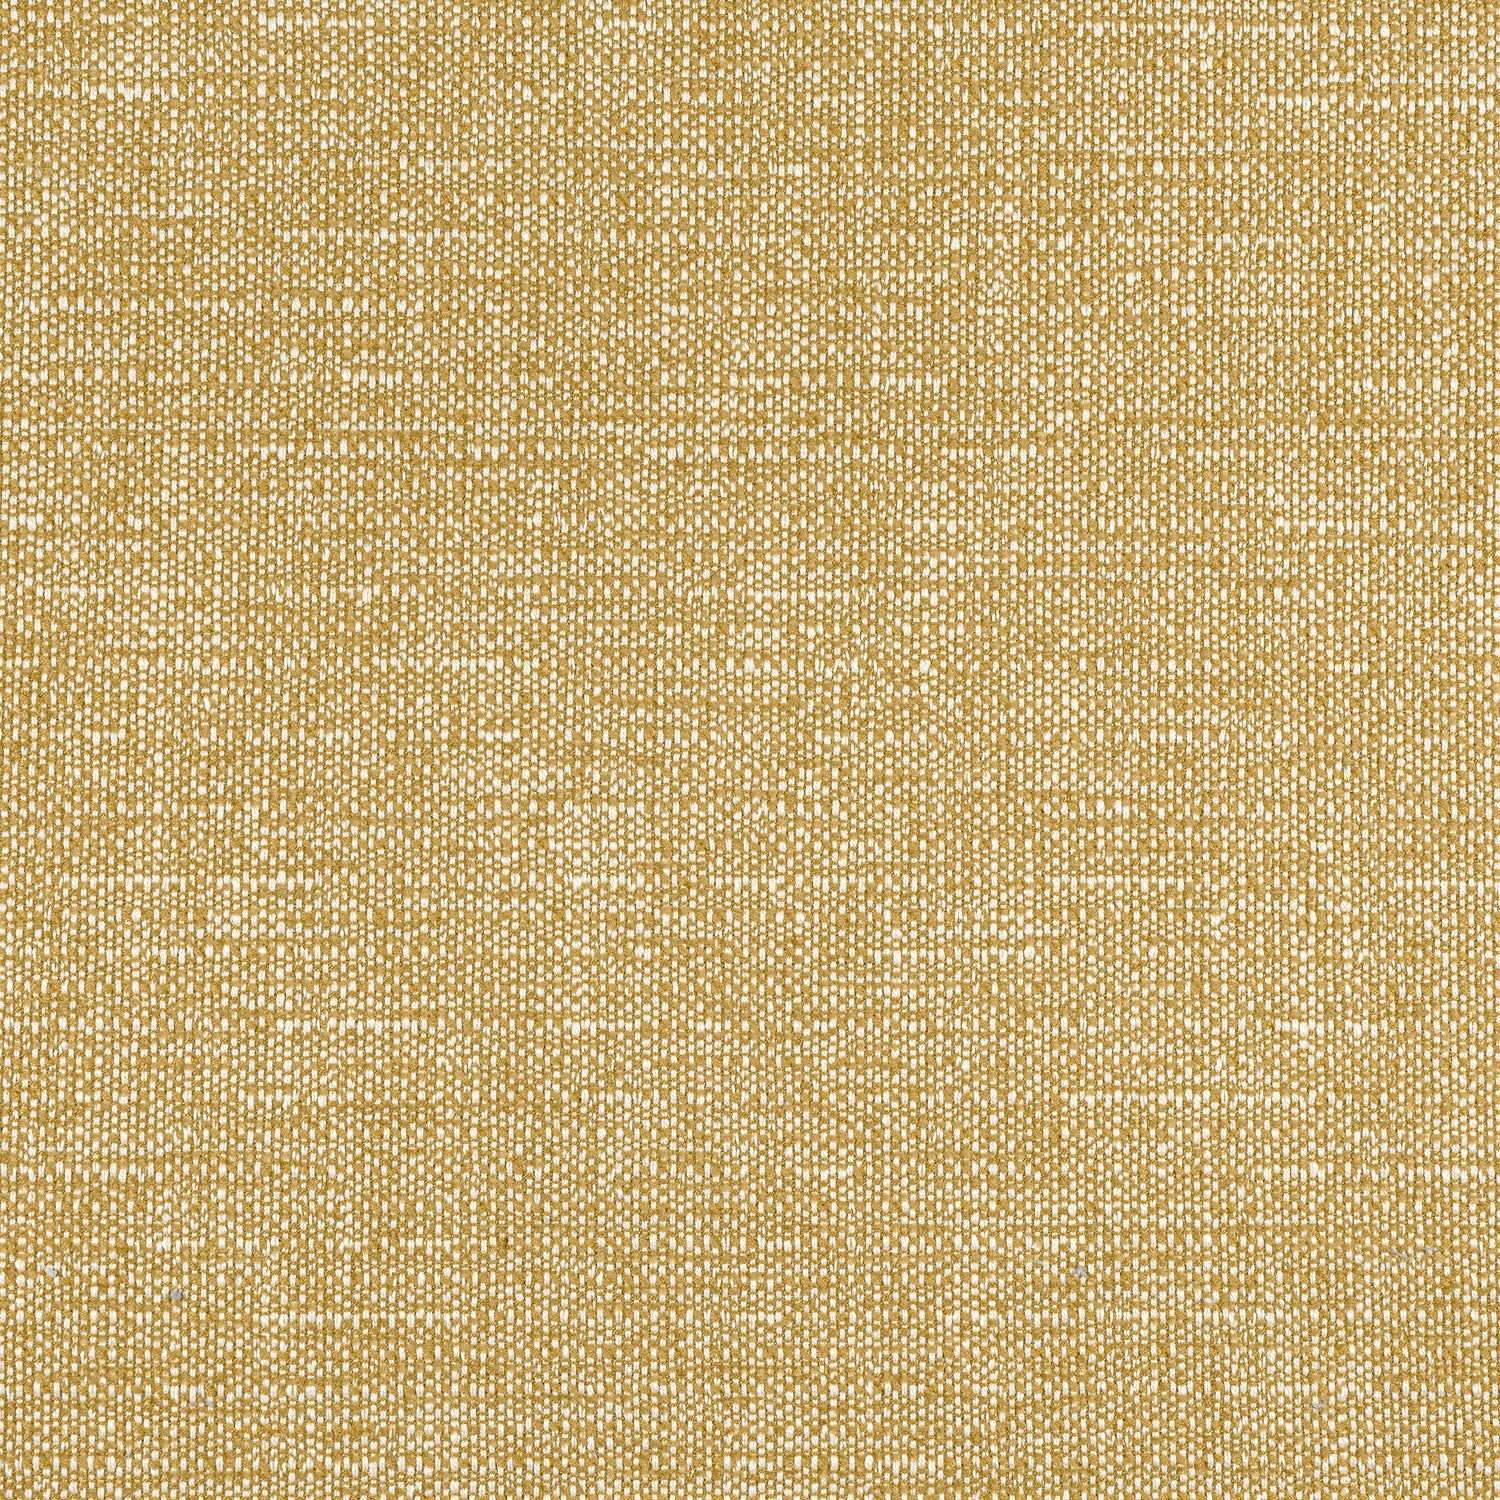 Petra fabric in straw color - pattern number W8738 - by Thibaut in the Haven Textures collection